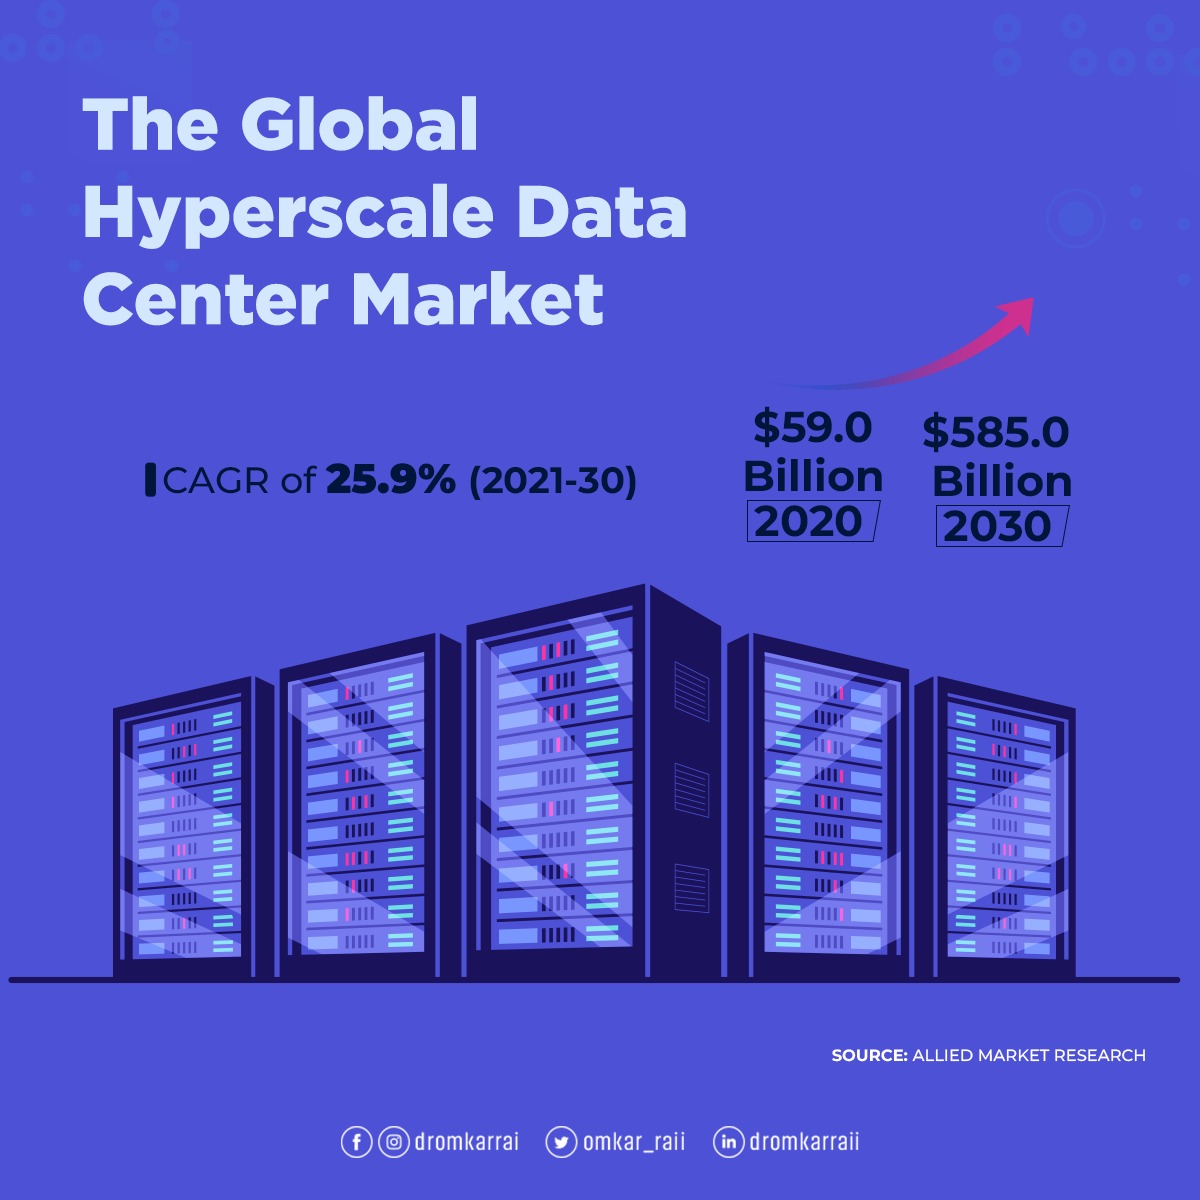 #MarketGrowth

The rise in demand for data centers to enhance productivity and customer experiences propels the growth of the global #hyperscaledatacenter market.
The market is expected to reach $585.0 bn by 2030, growing at a CAGR of 25.9% from 2021 to 2030.